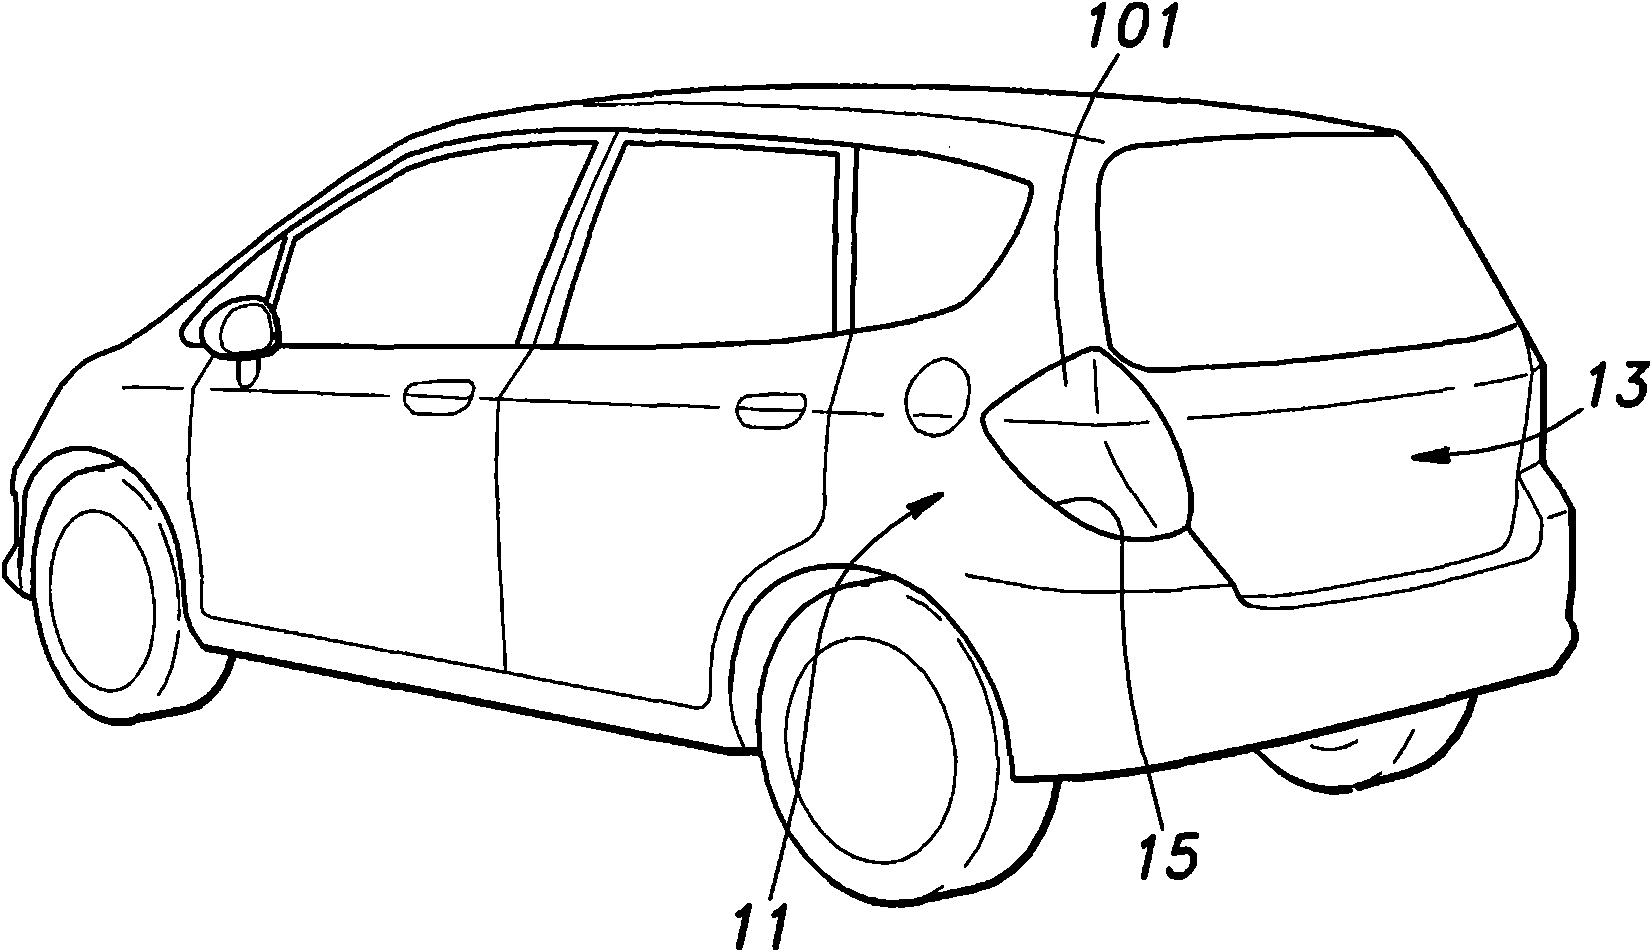 Rear panel structure of automobile